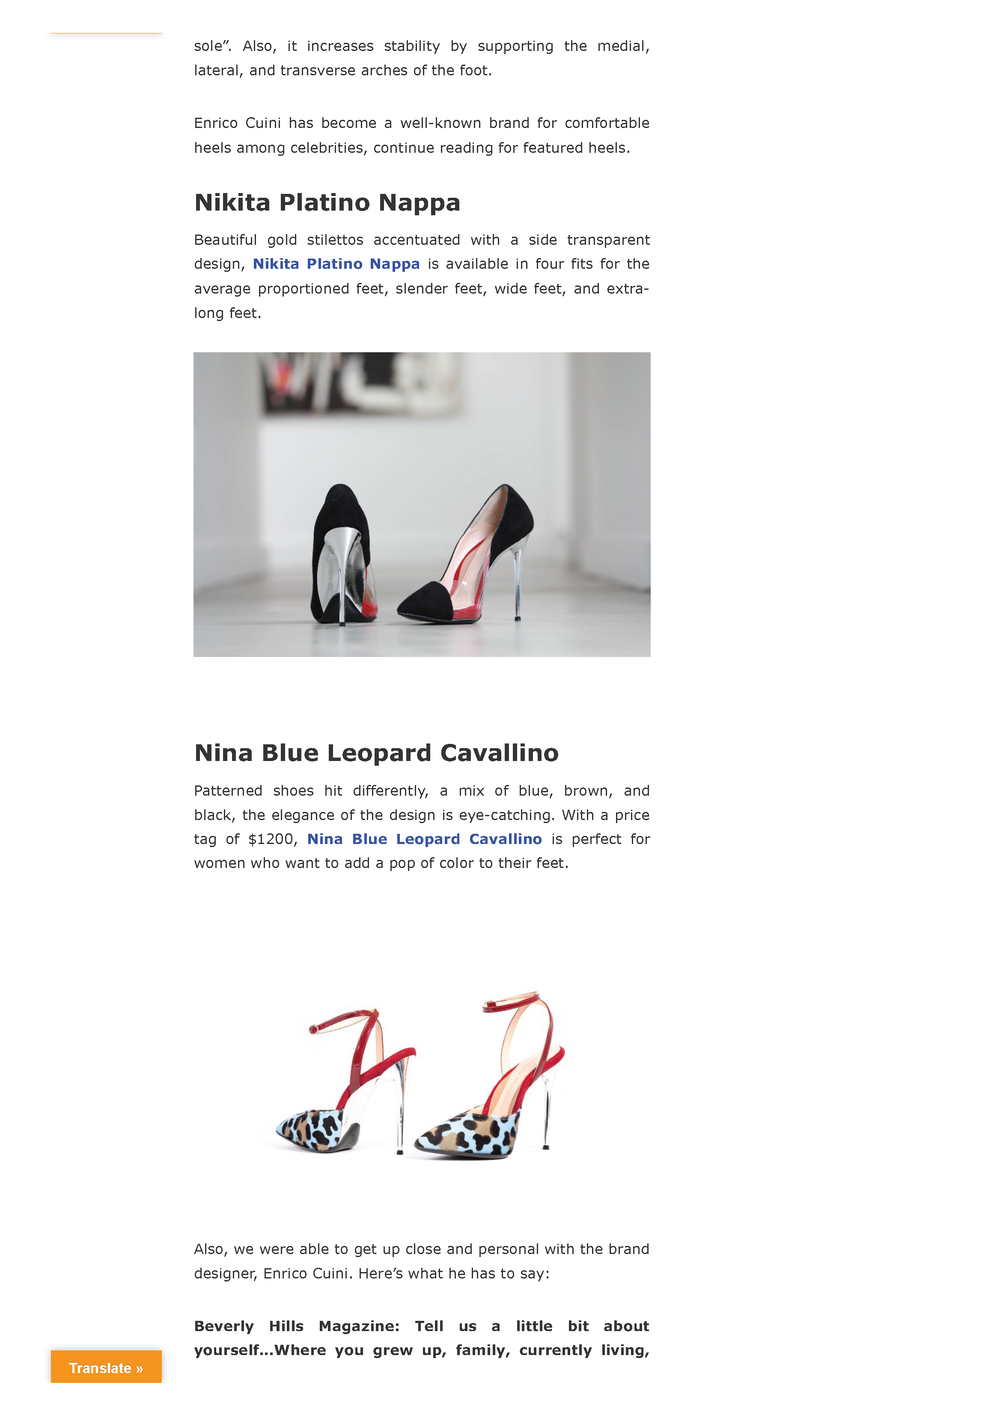 Fashion World_ Enrico Cuini Shoes For Women ⋆ Beverly Hills Magazine_Page_2.png